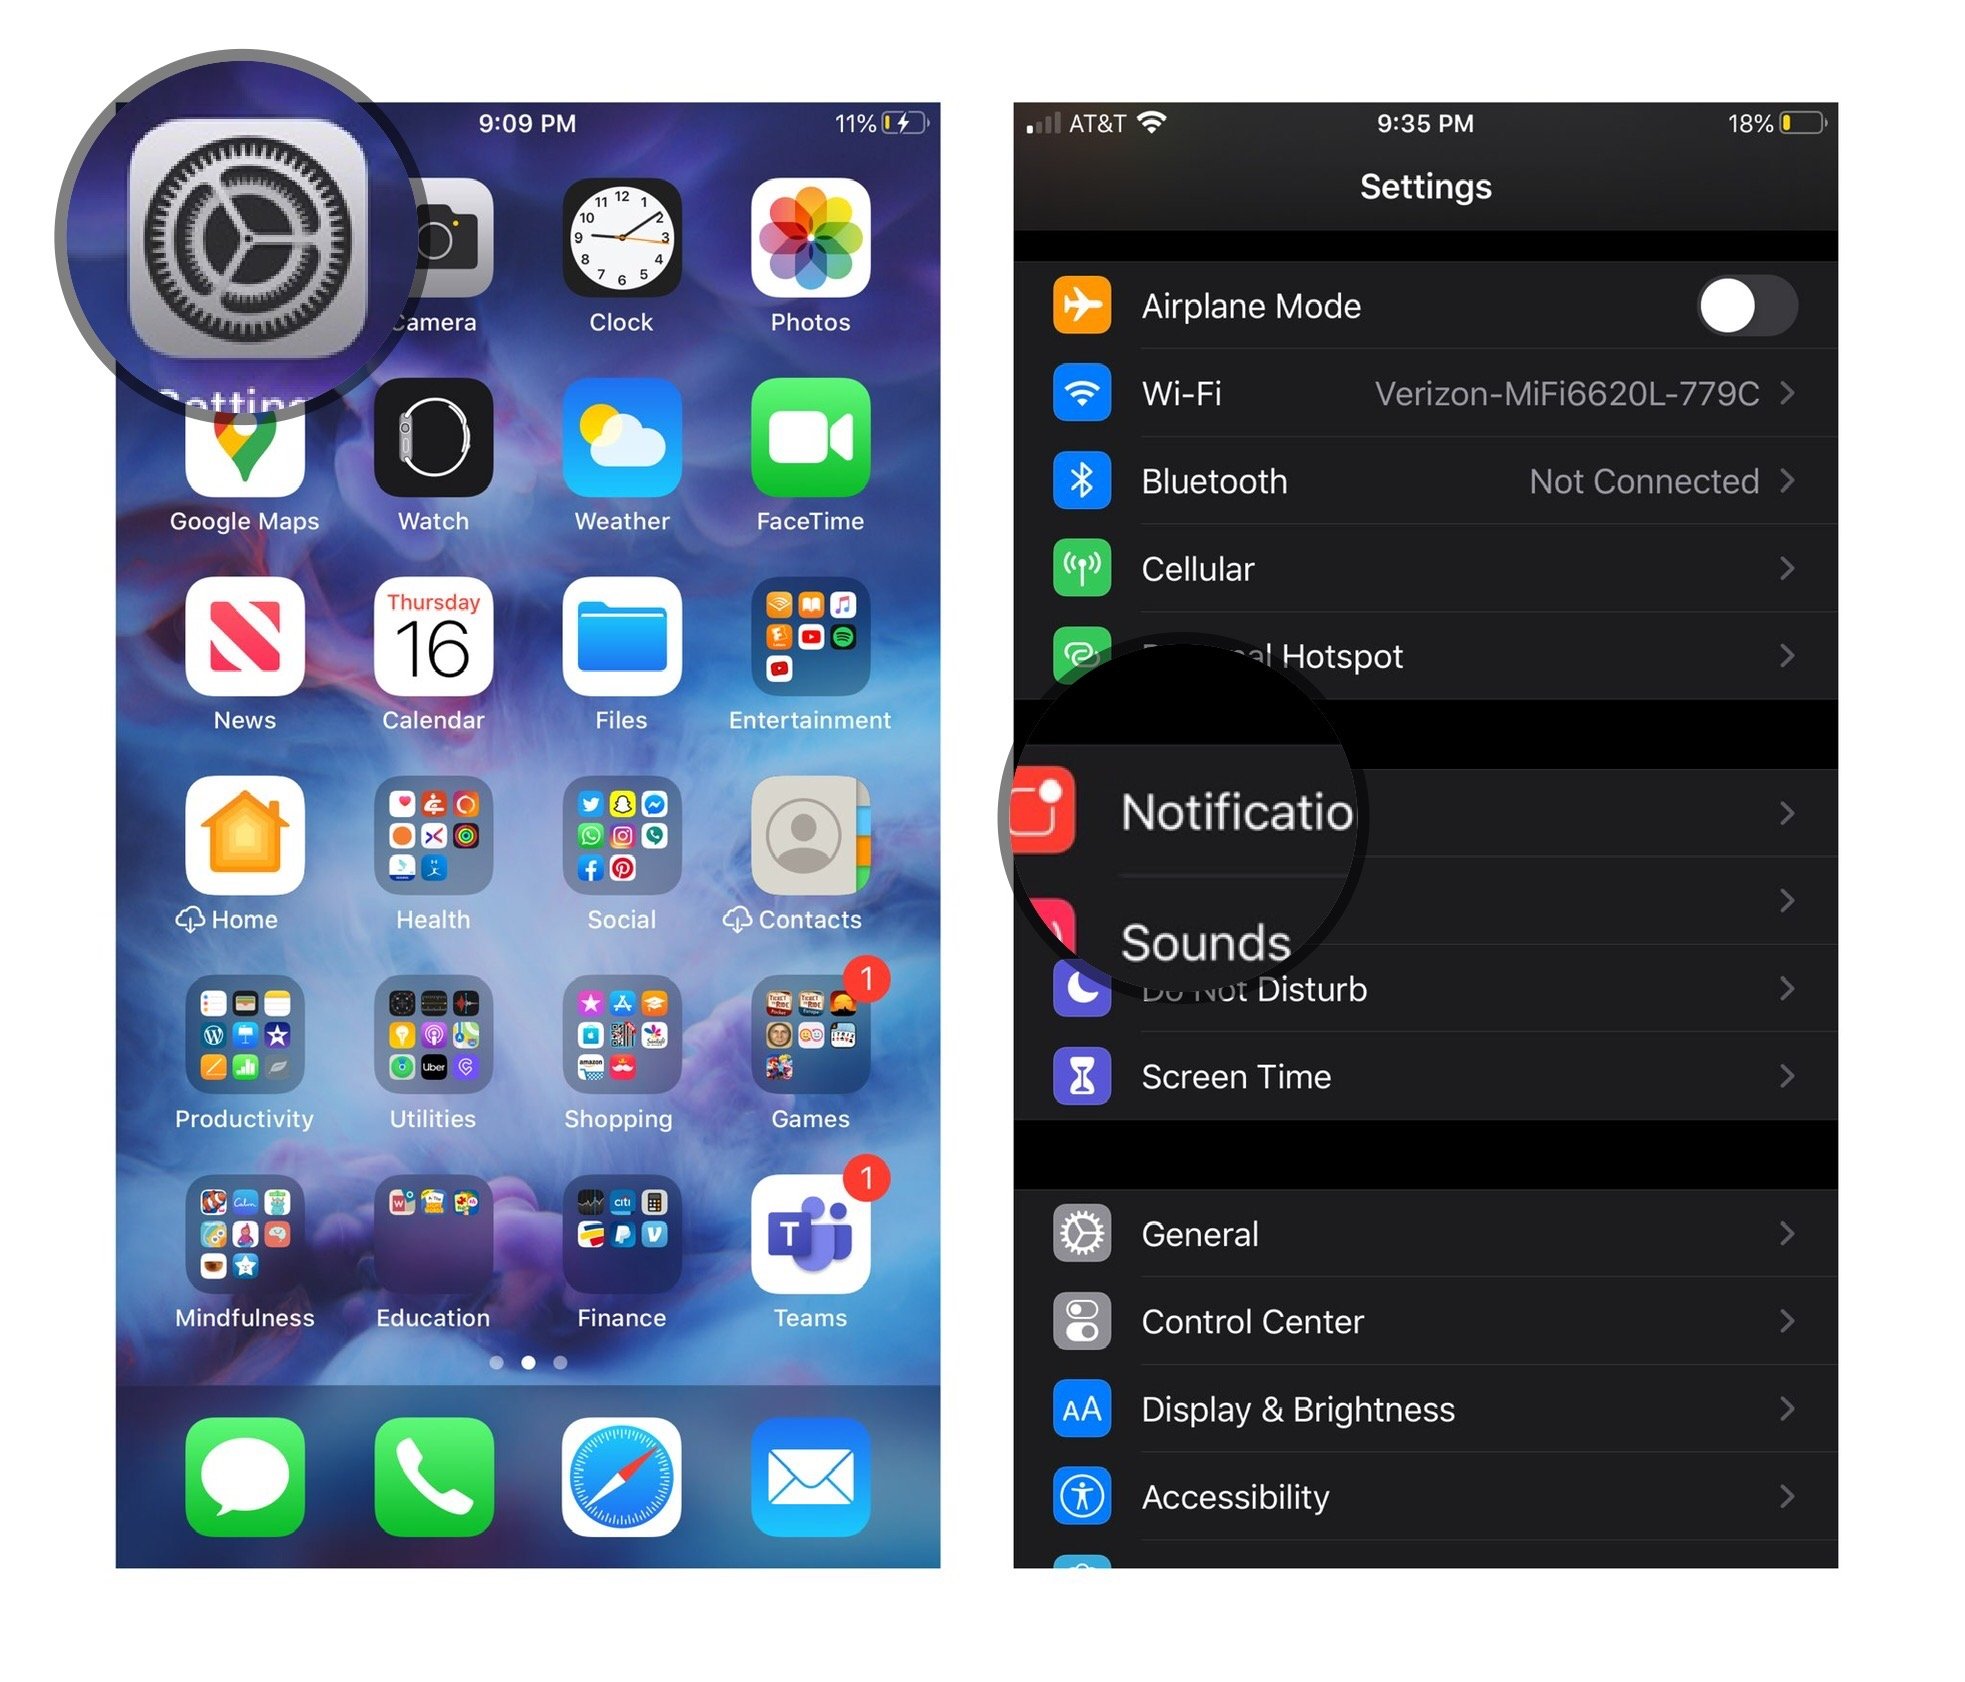 Disable notifications: Launch Settings app, Tap Notifications